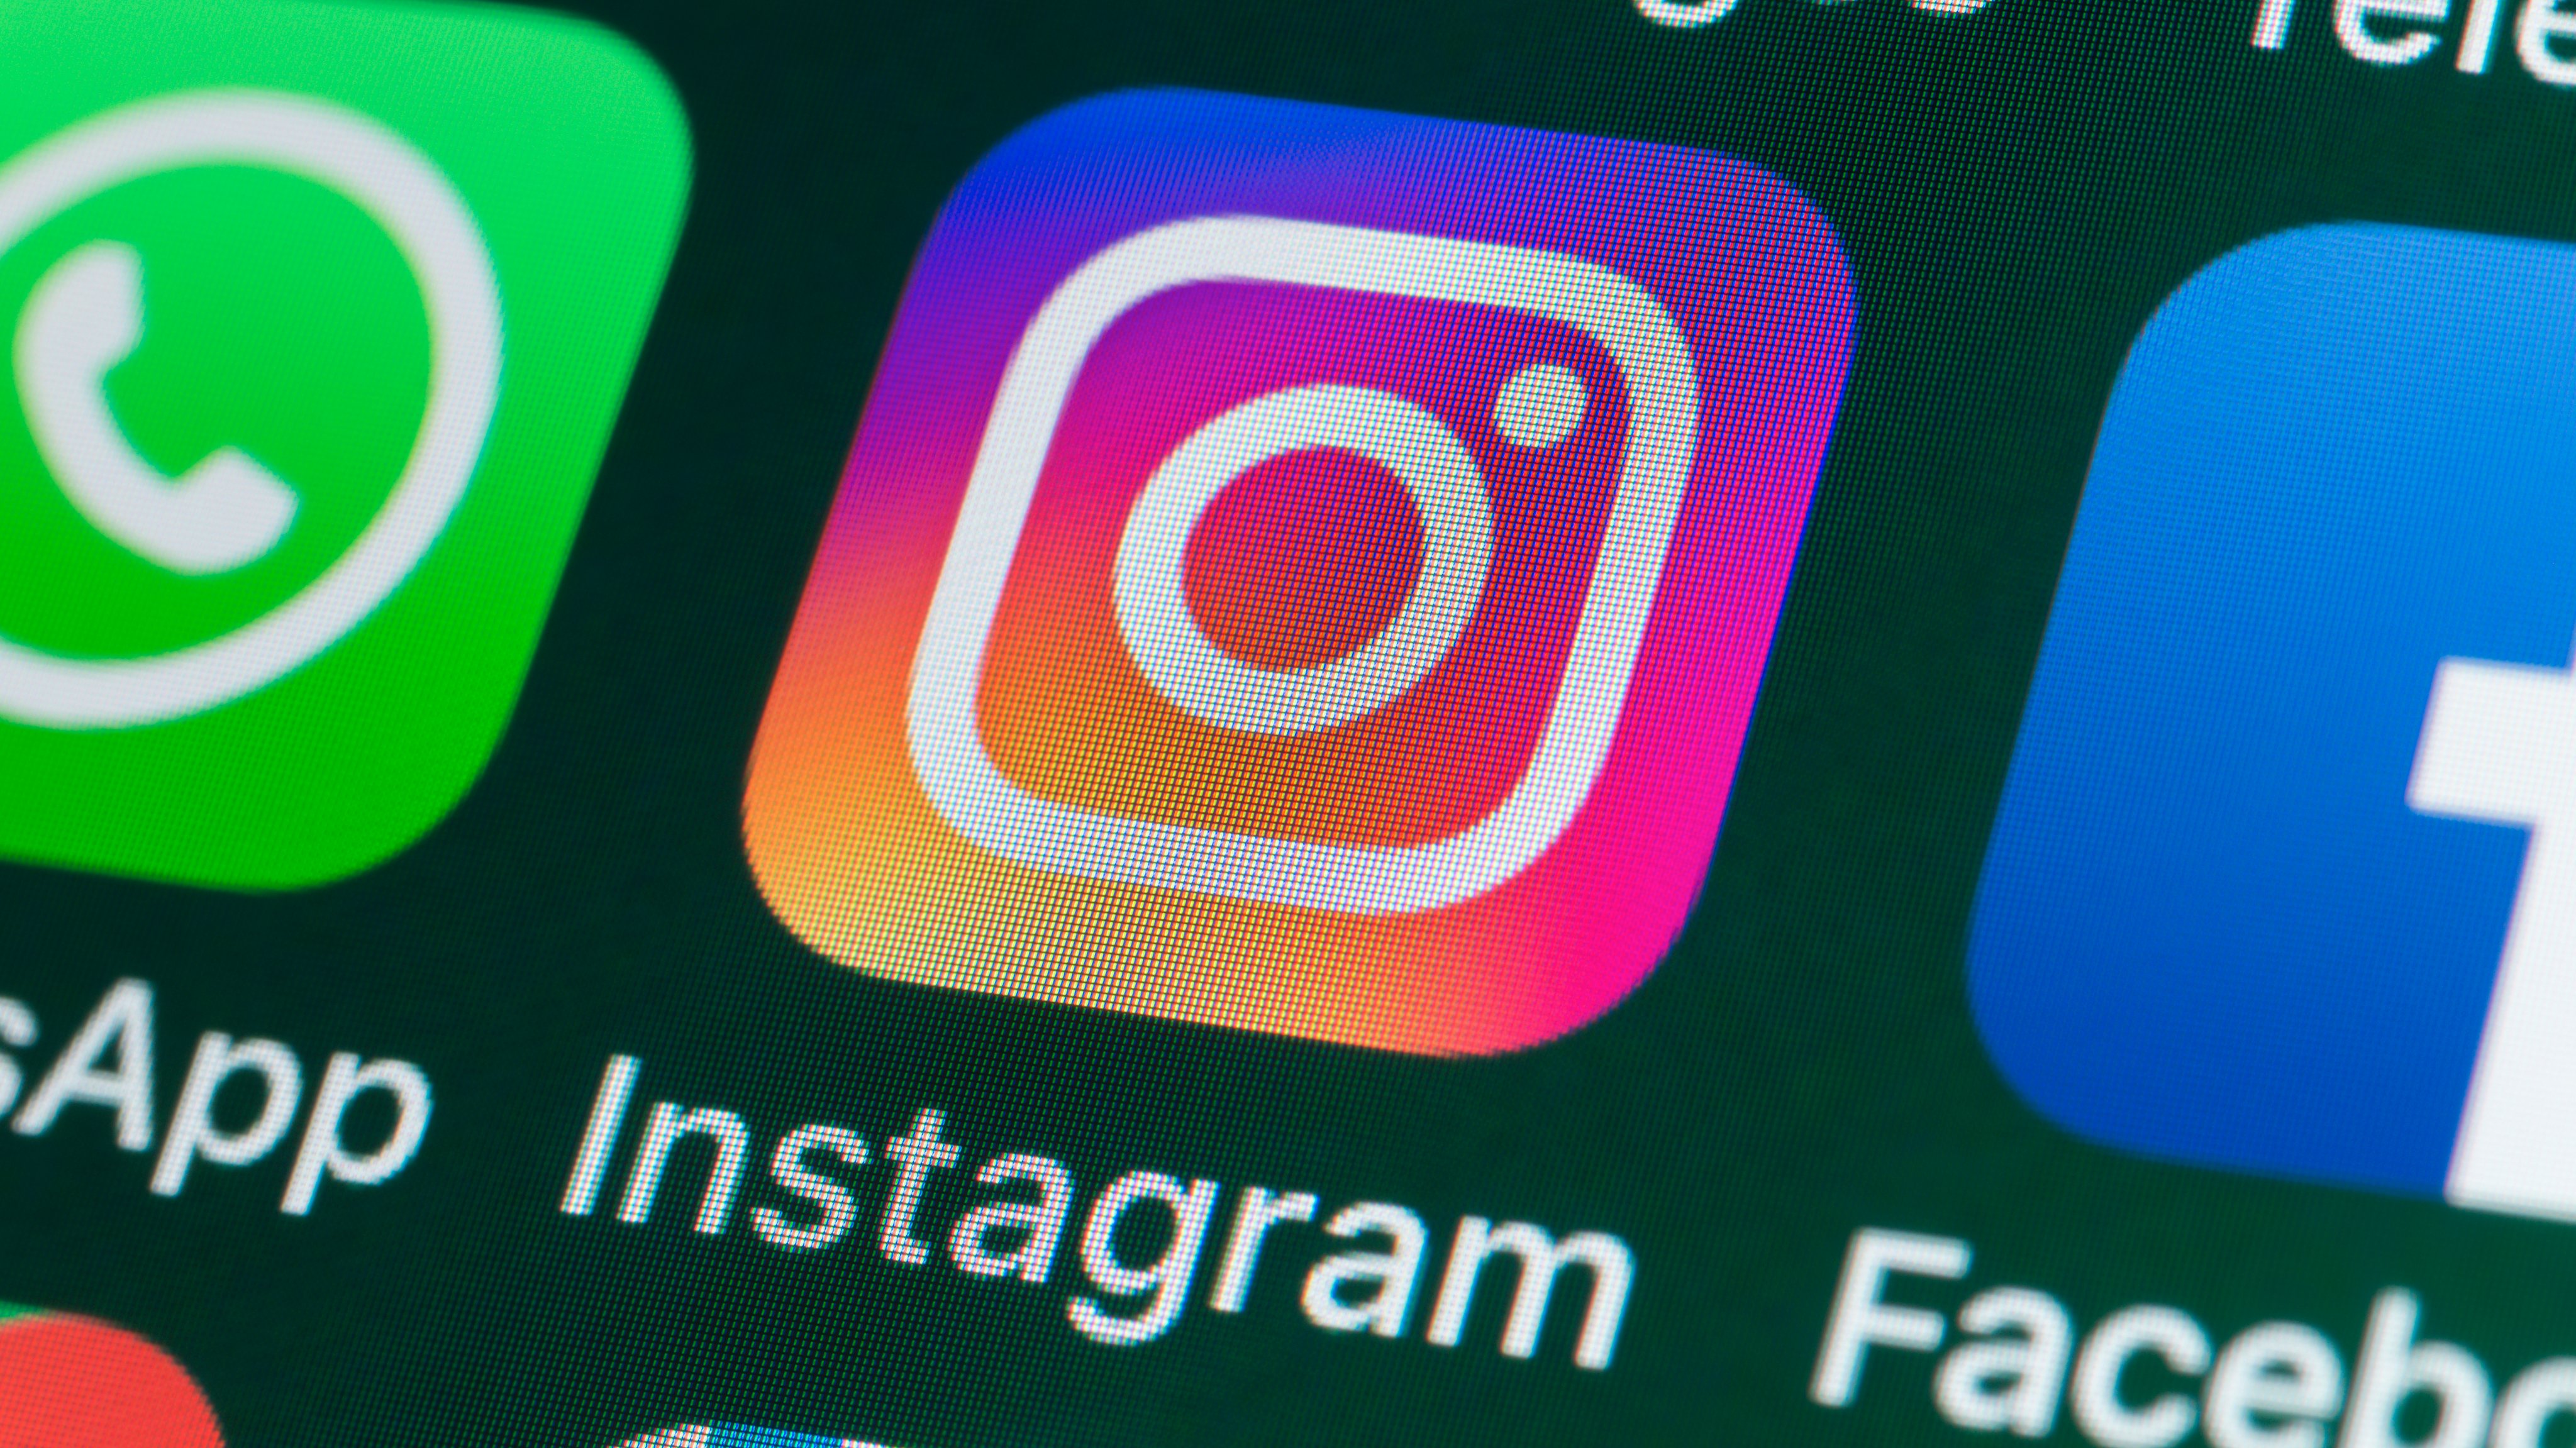 Instagram, WhatsApp, Facebook and other Apps on iPhone screen